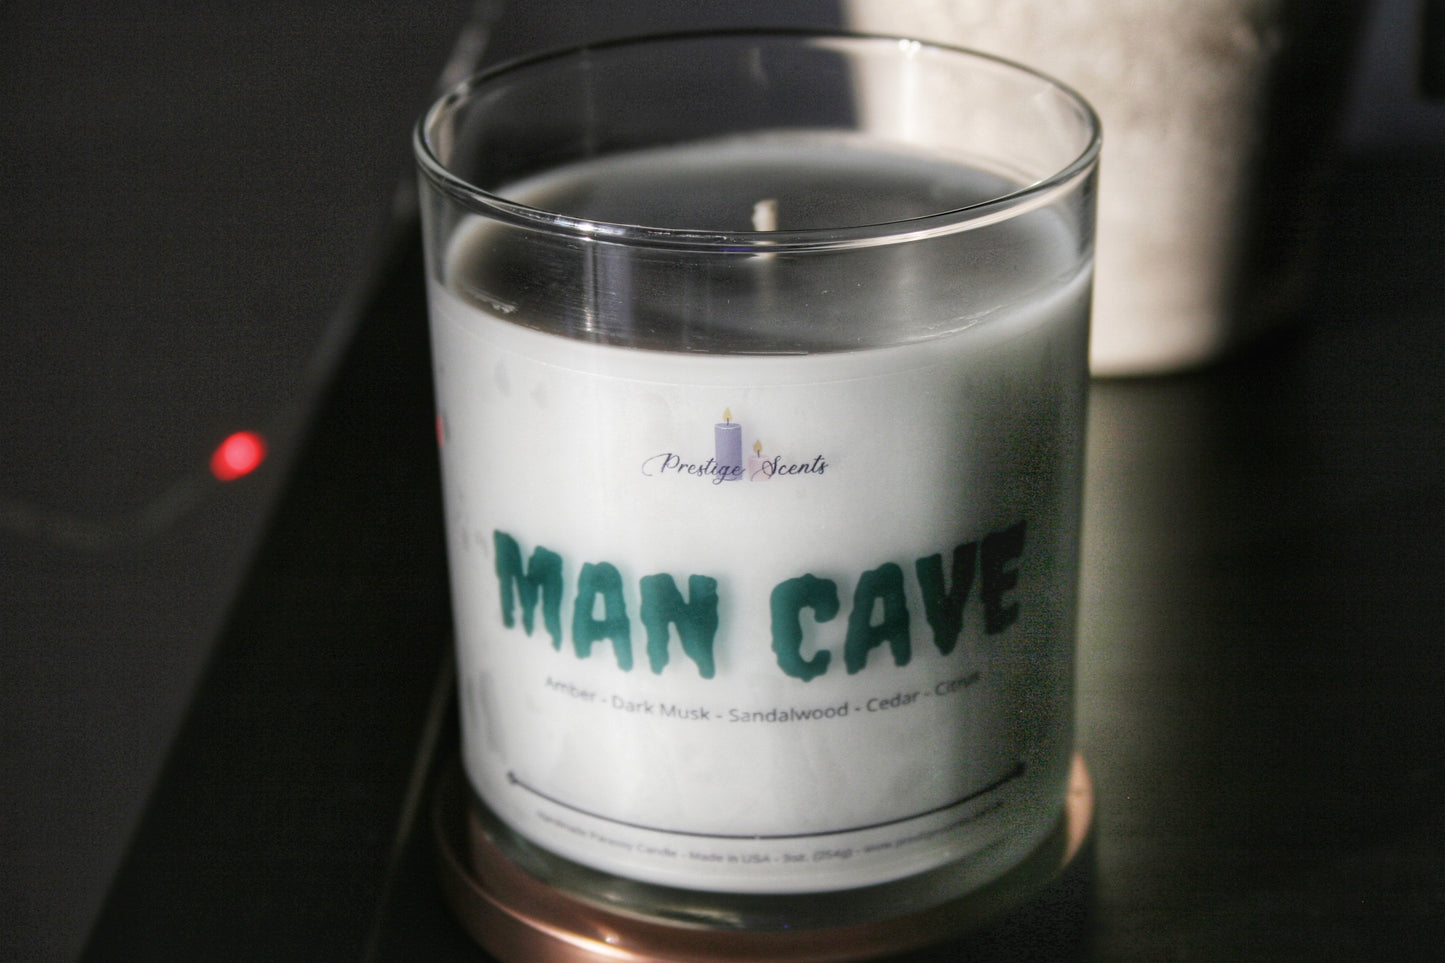 Man Cave Candle